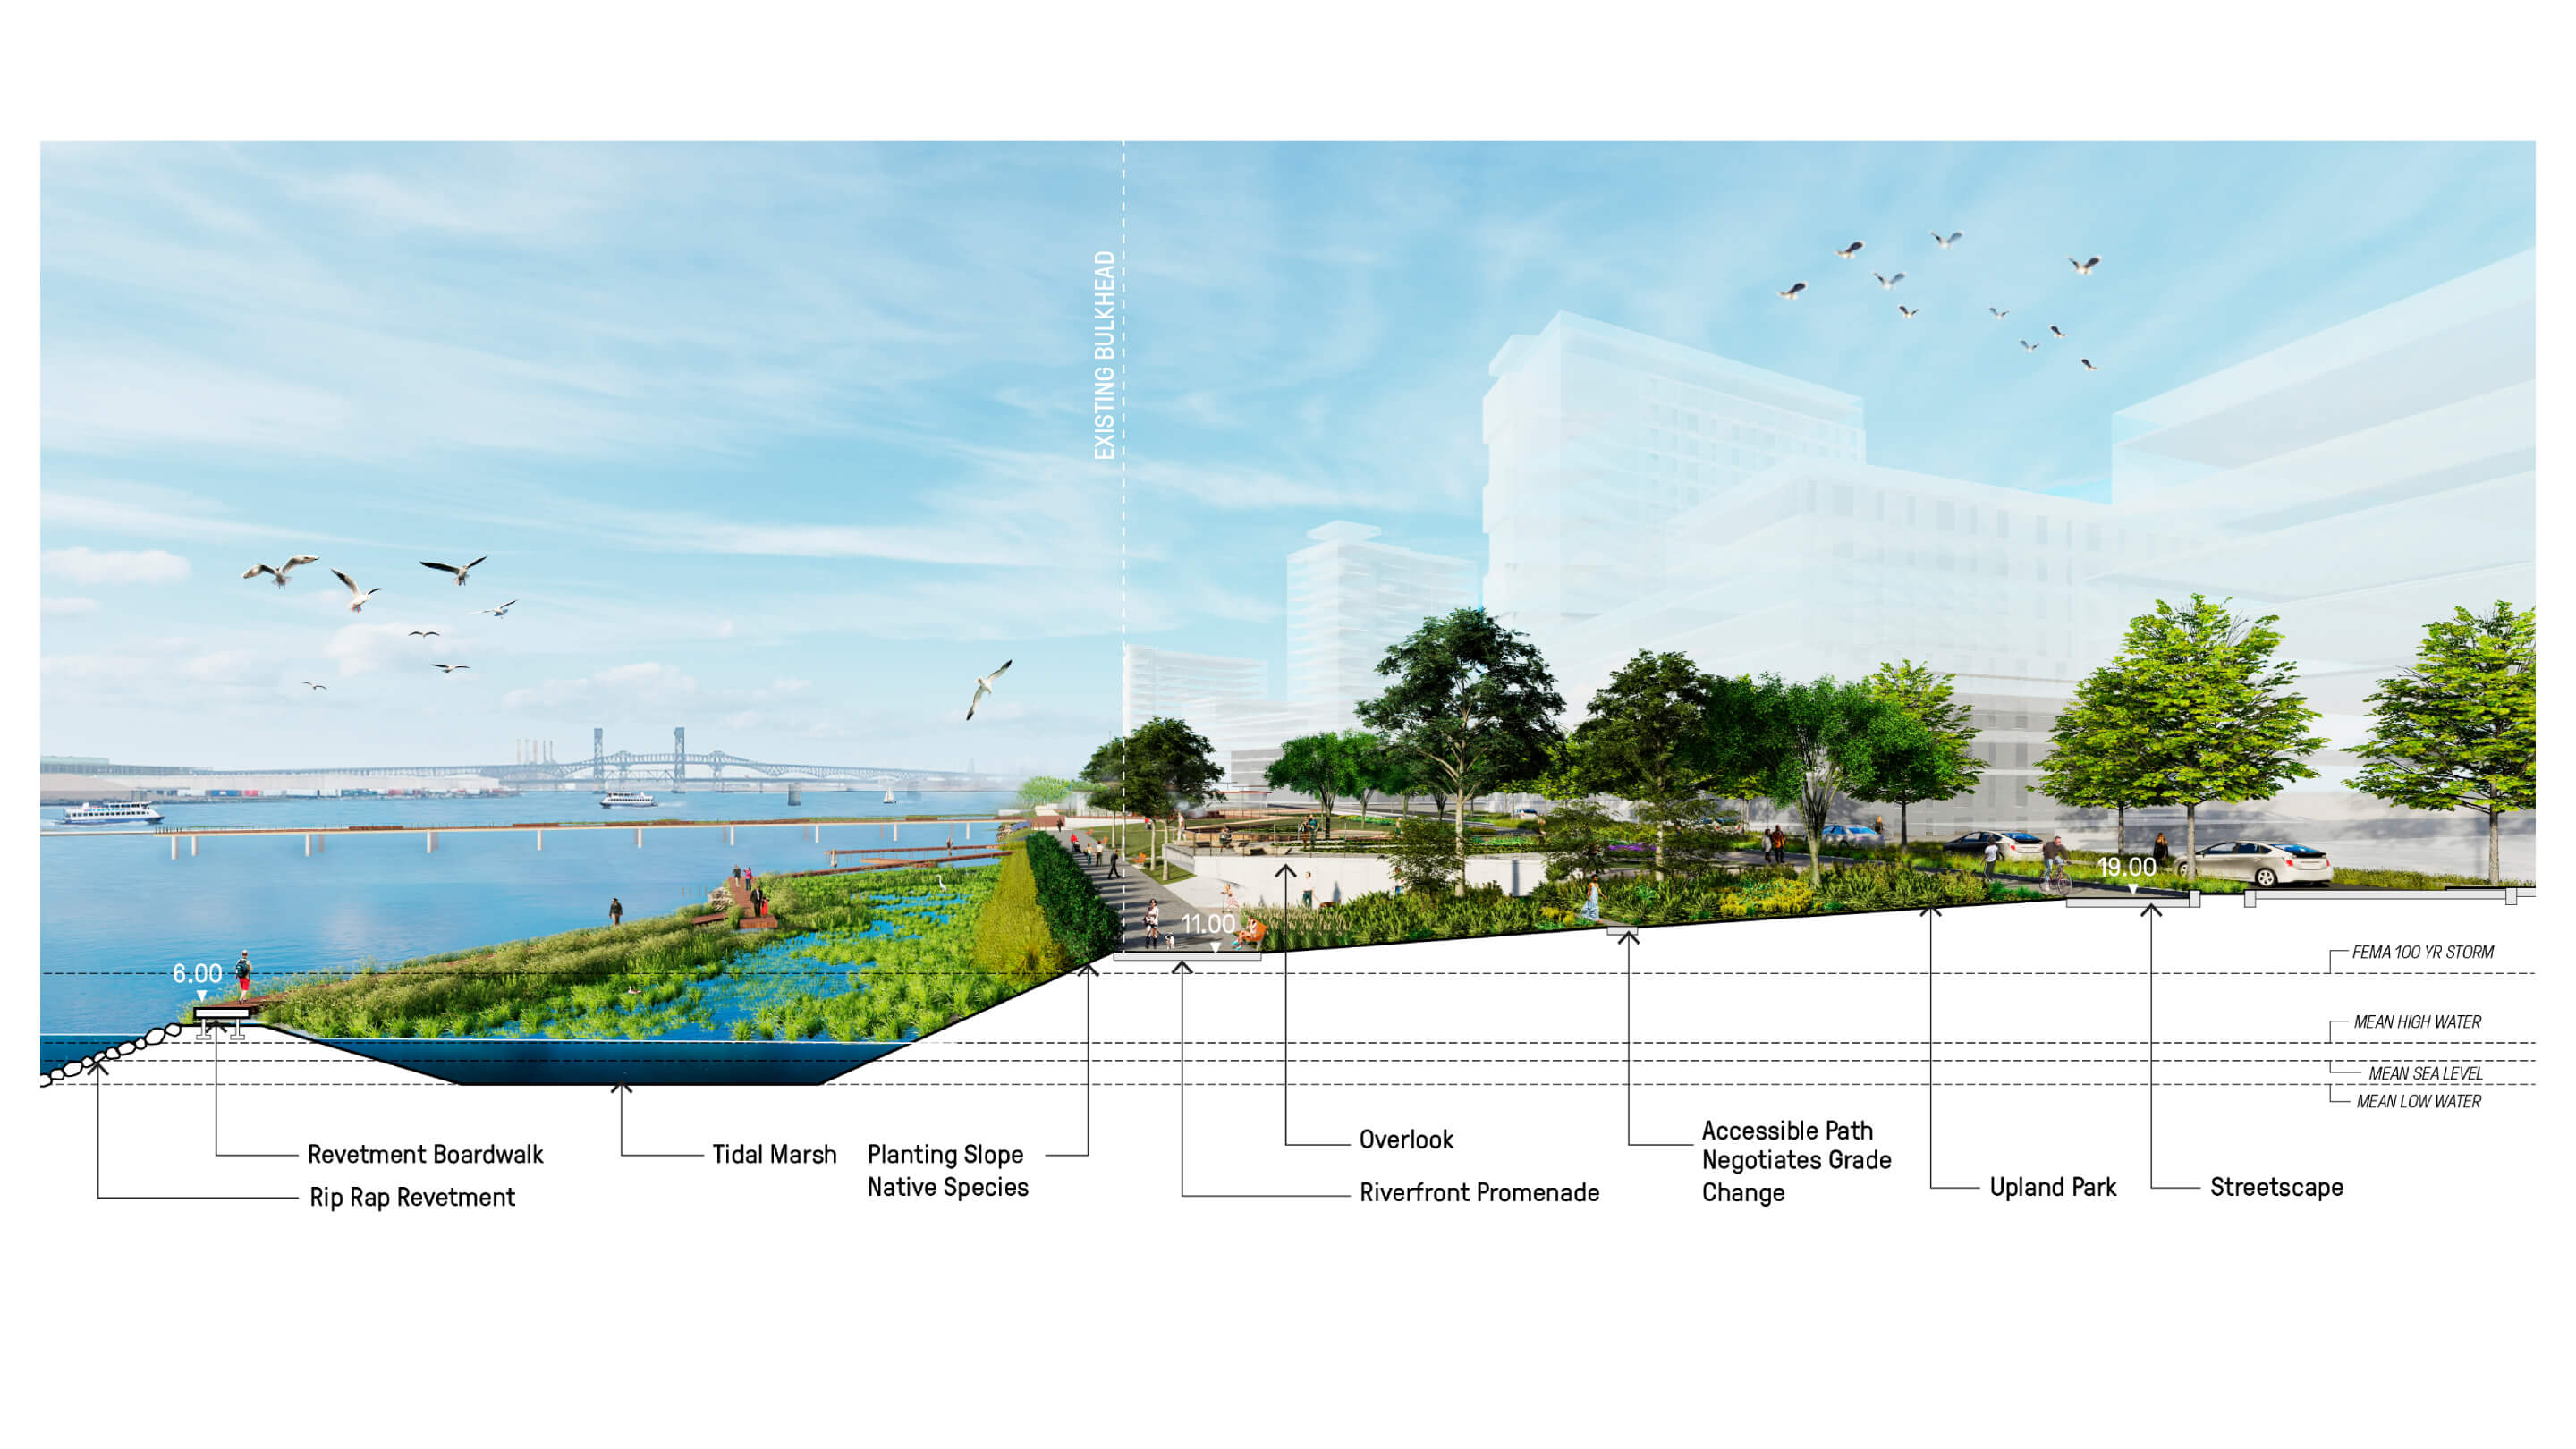 A cross section of a park built on infill going to the water's edge